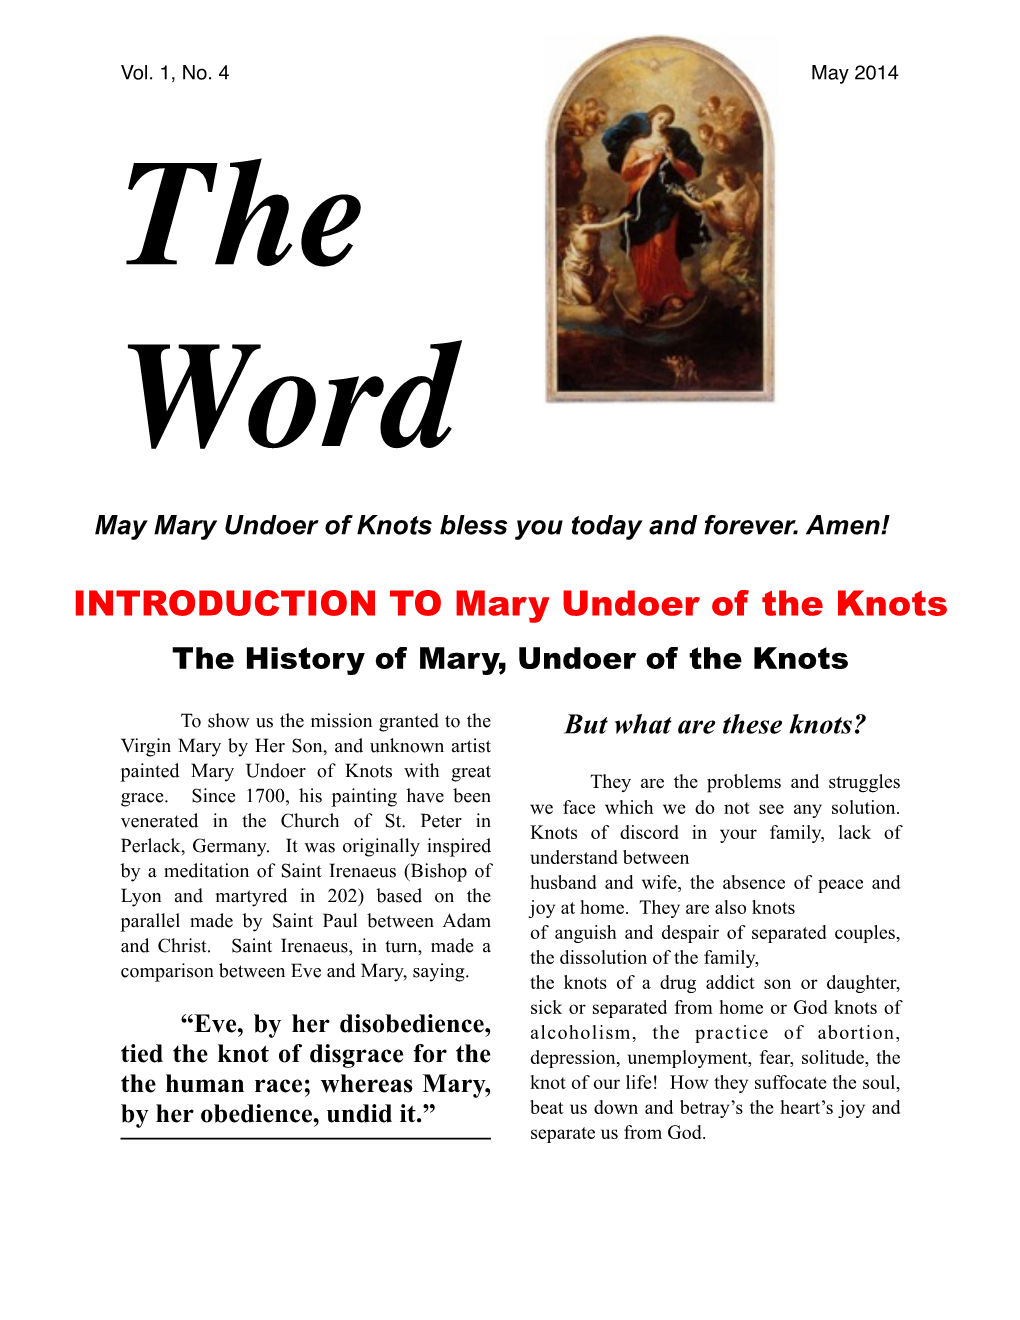 INTRODUCTION to Mary Undoer of the Knots the History of Mary, Undoer of the Knots